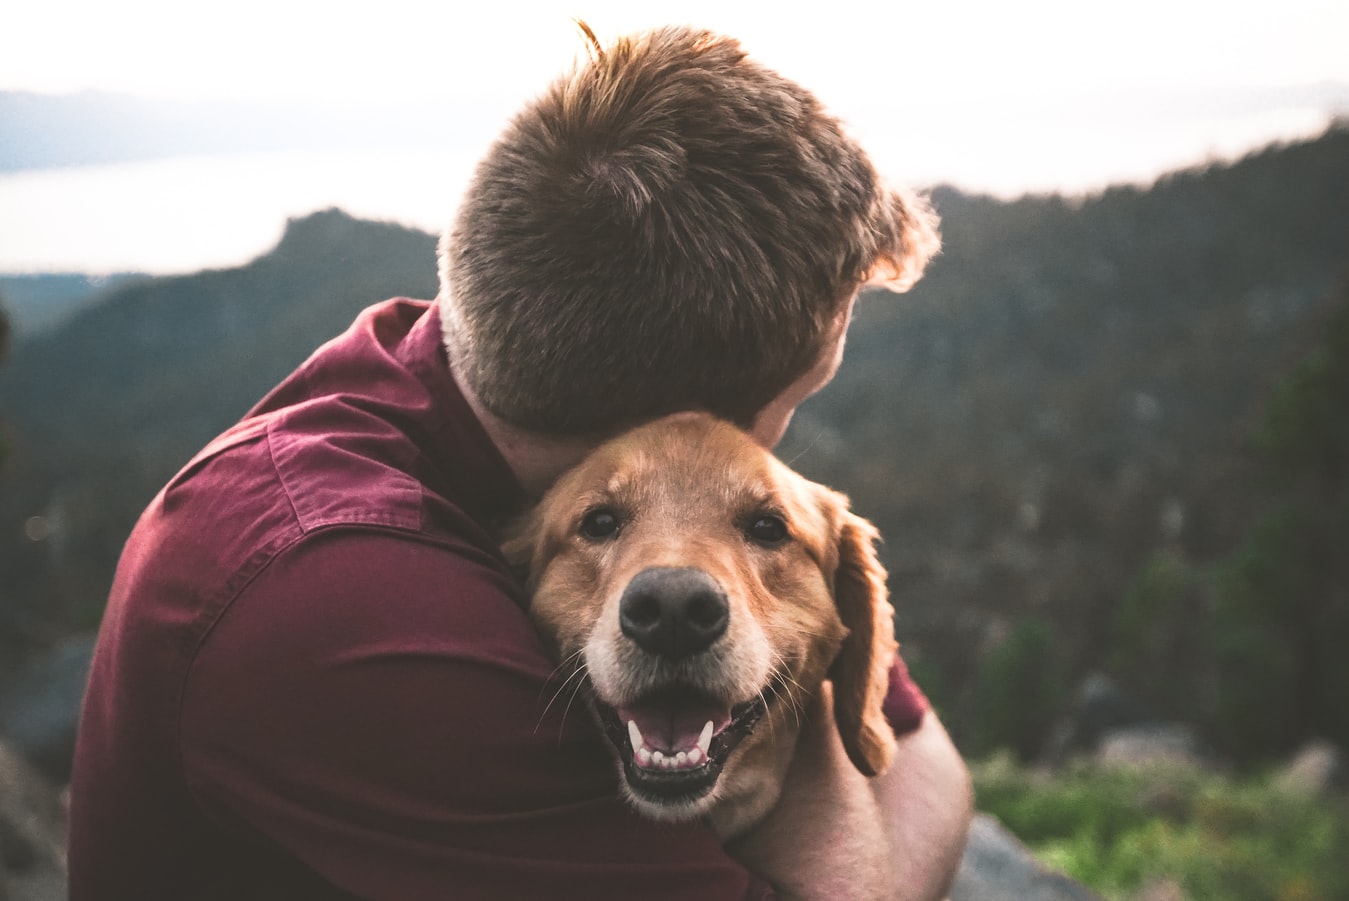 a man takes a break during his hike to give his dog affection. animals can be helpful during addiction recovery